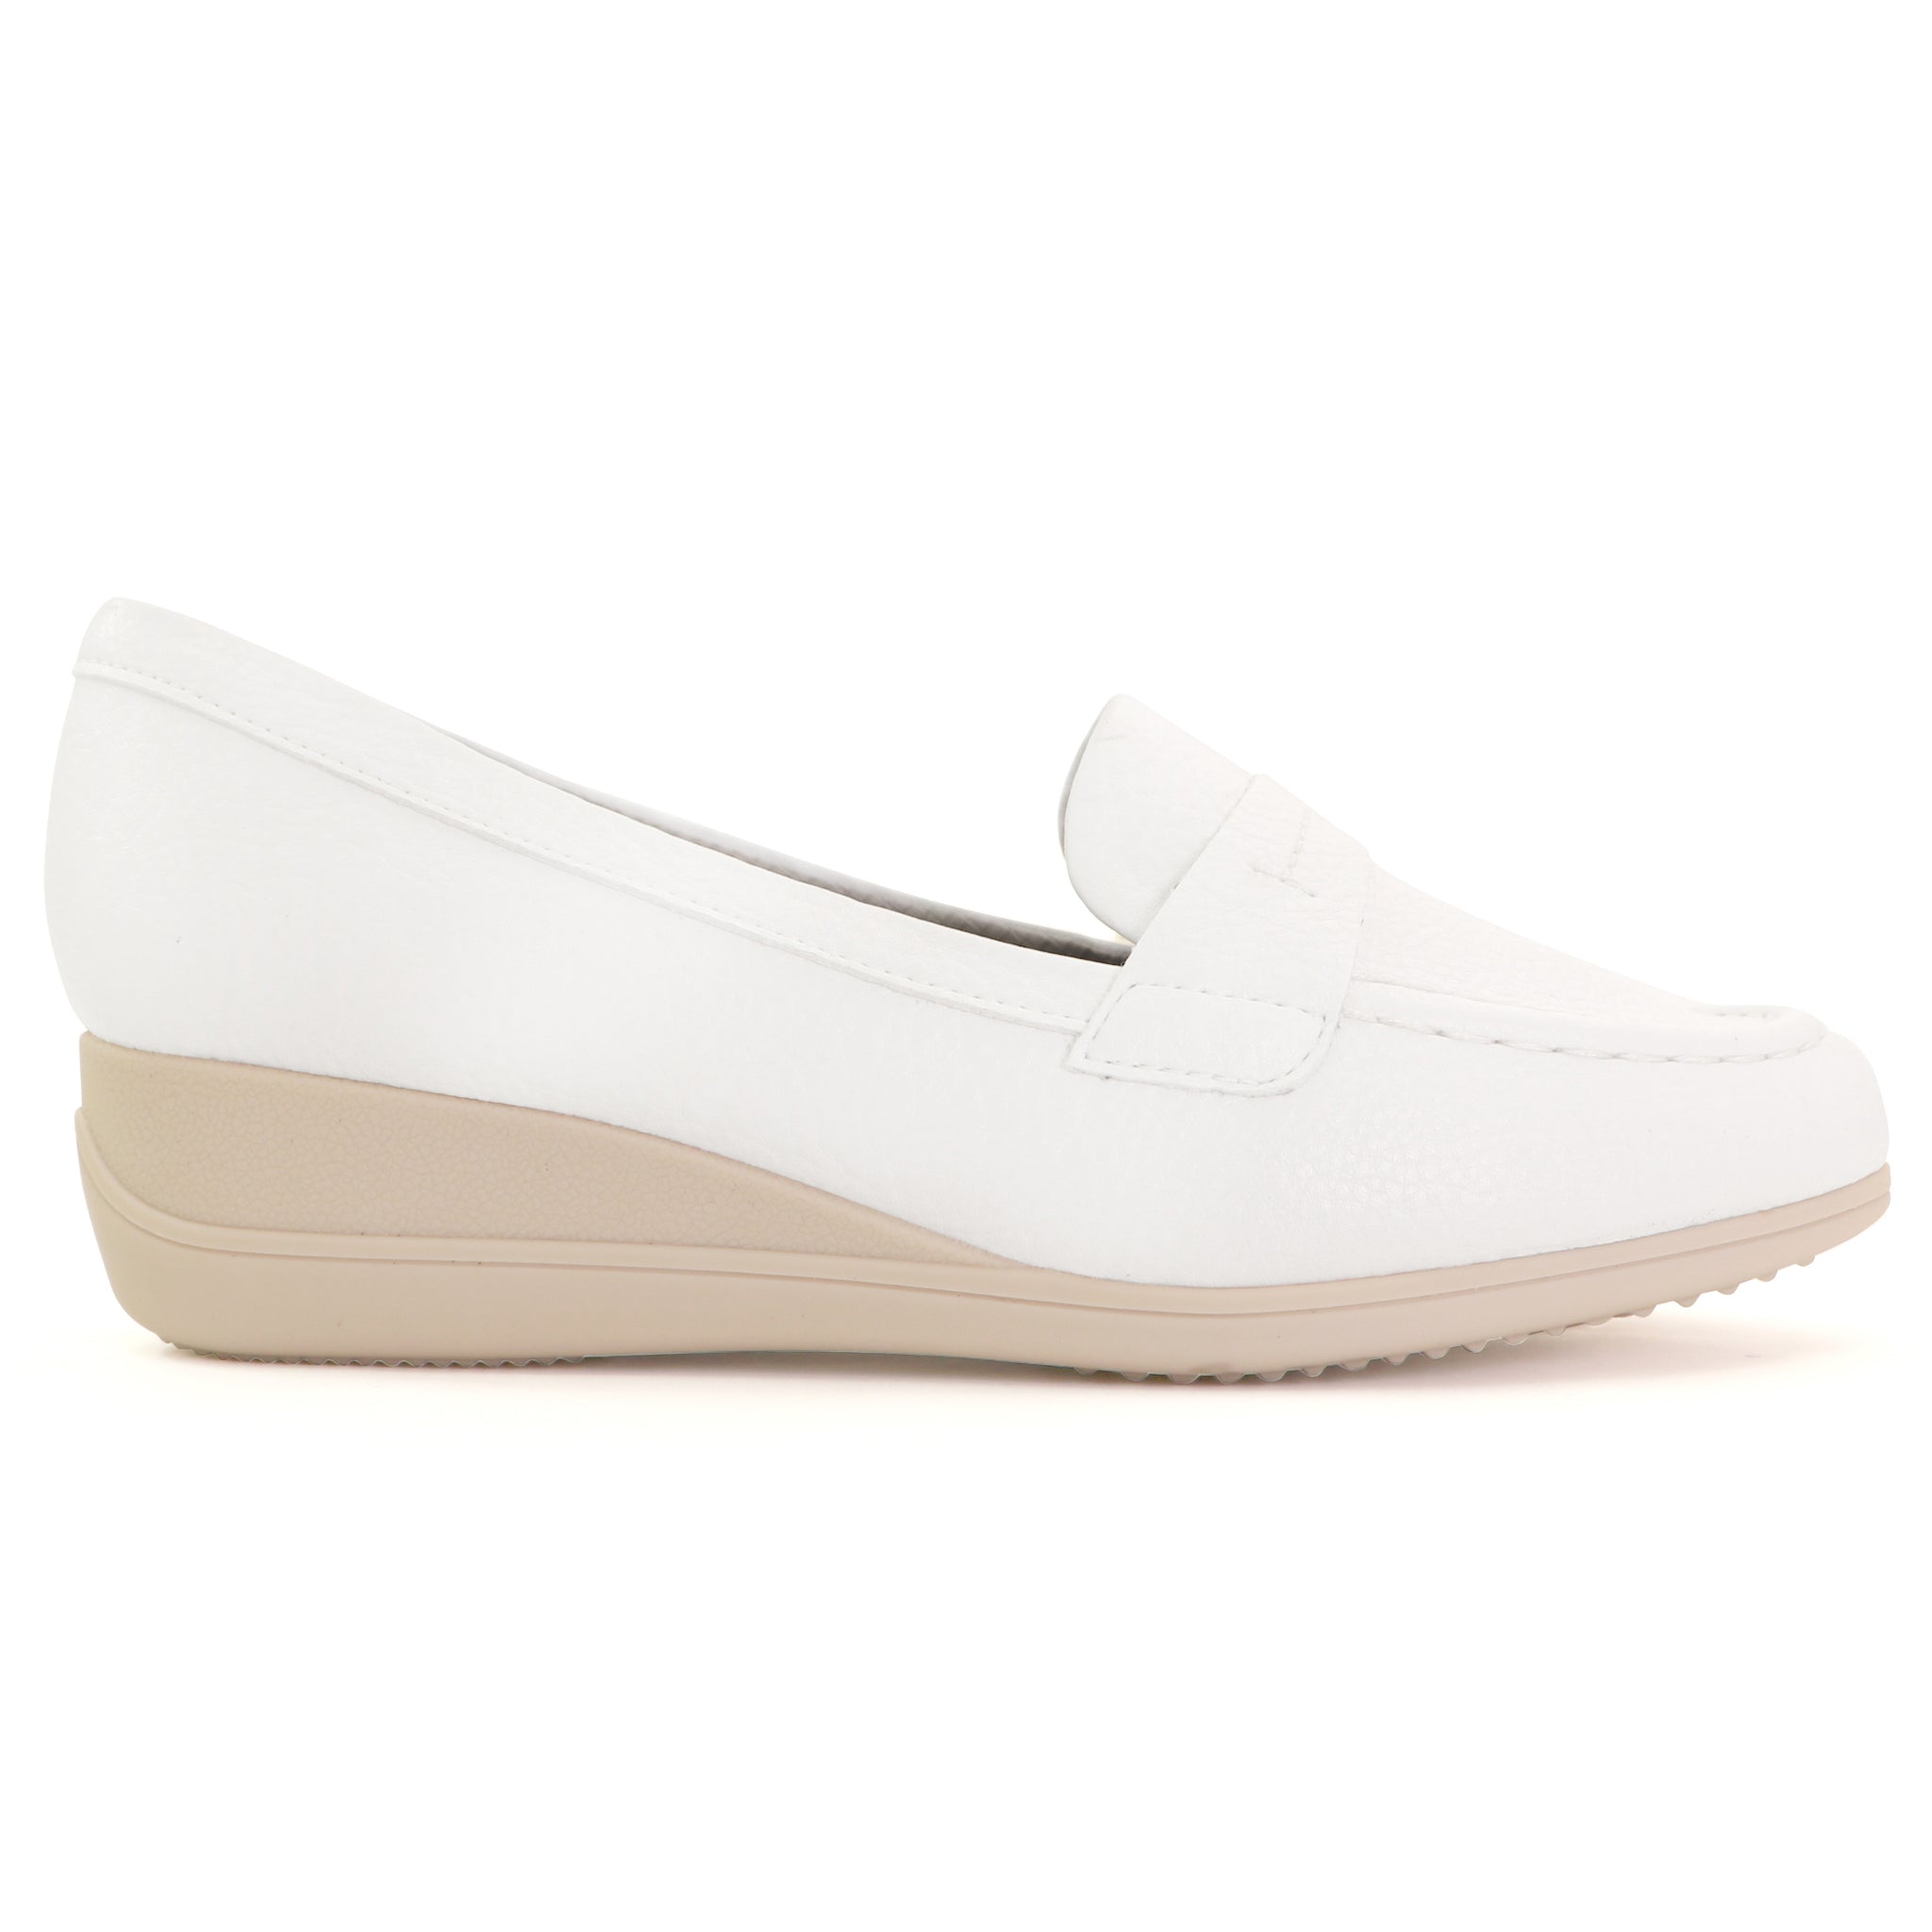 white wedge shoes womens